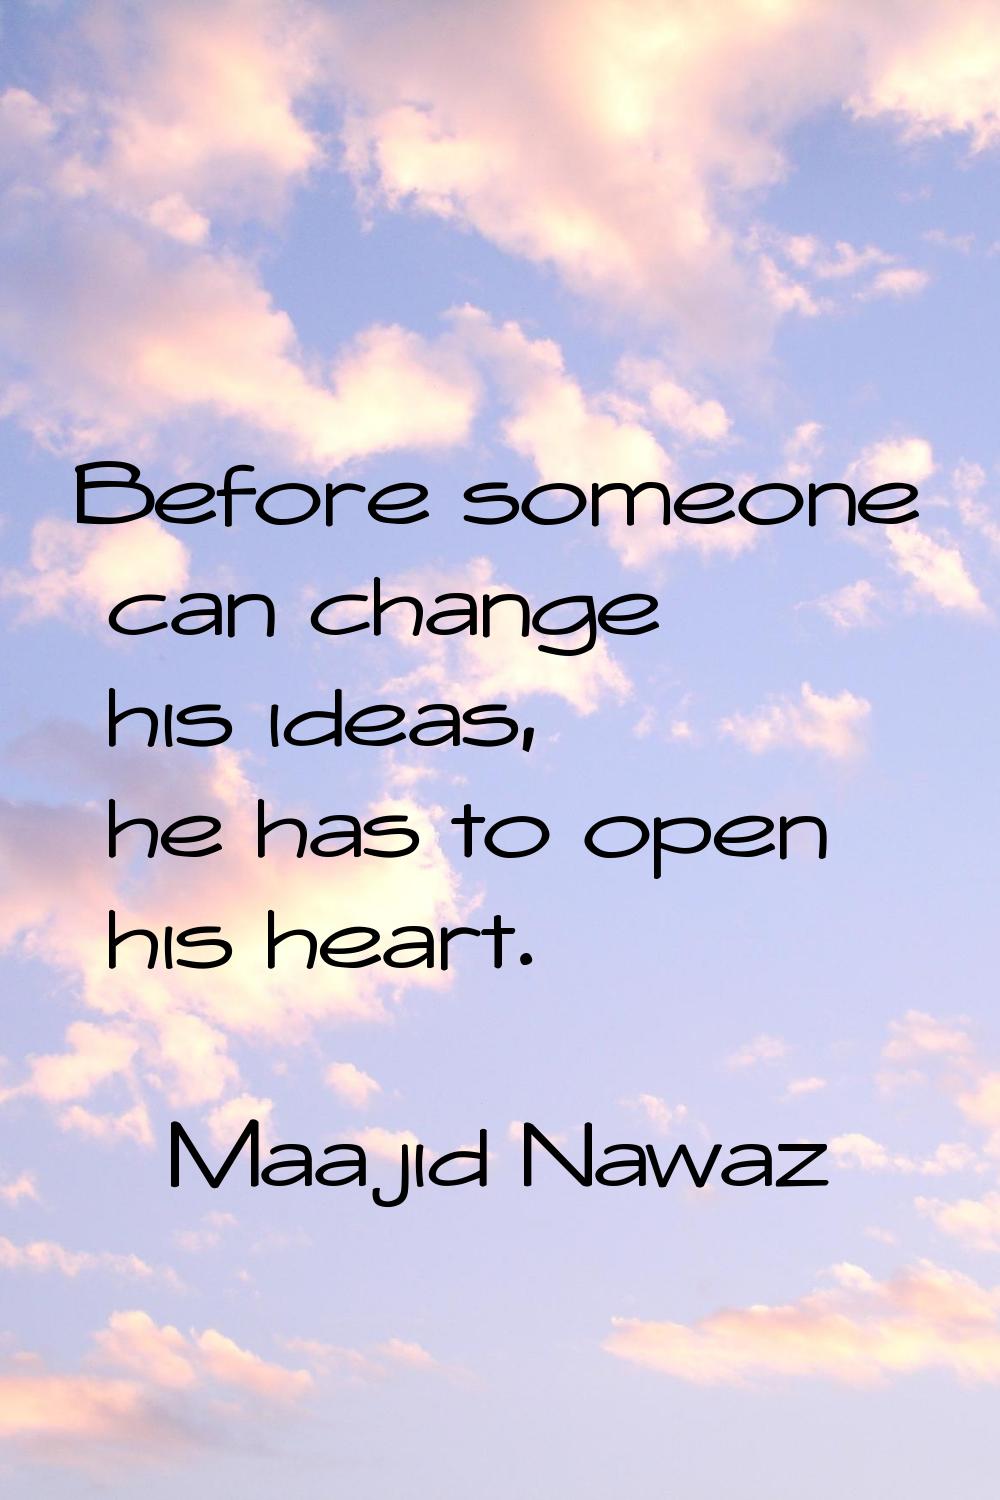 Before someone can change his ideas, he has to open his heart.